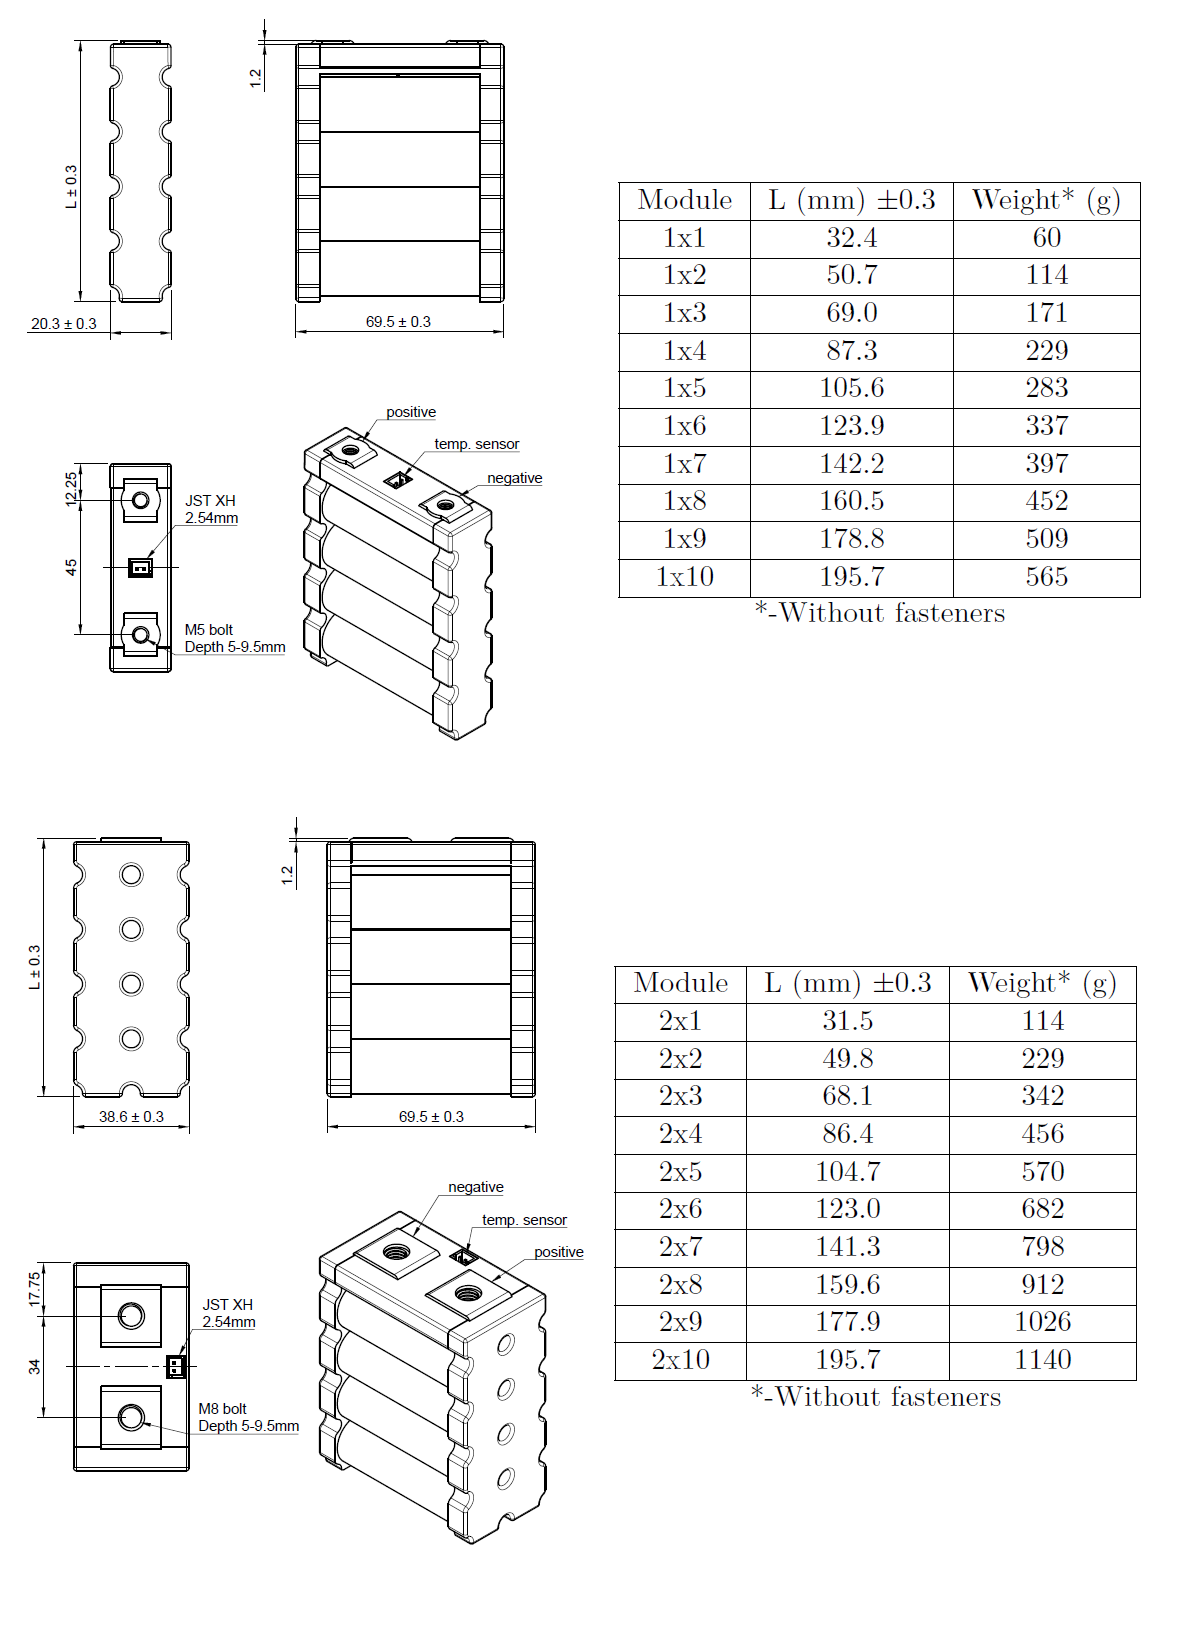 Sony-Murata VTC5A Li-ion Battery Module Dimensions and Weight, Electric Formula Student Battery Pack, Formula SAE electric 